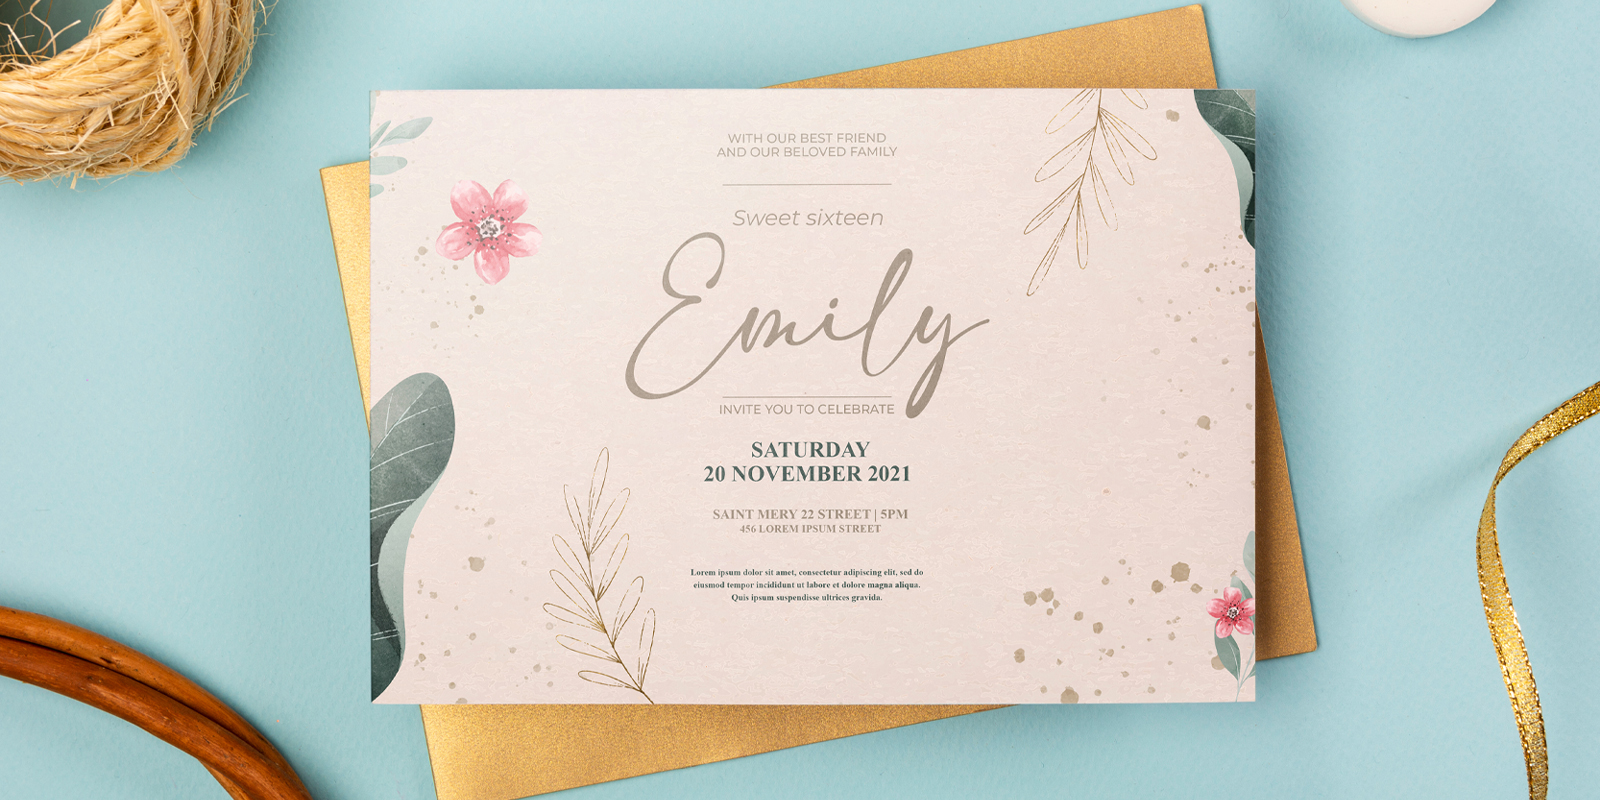 Invitations in Wollongong - Print with Pagerr